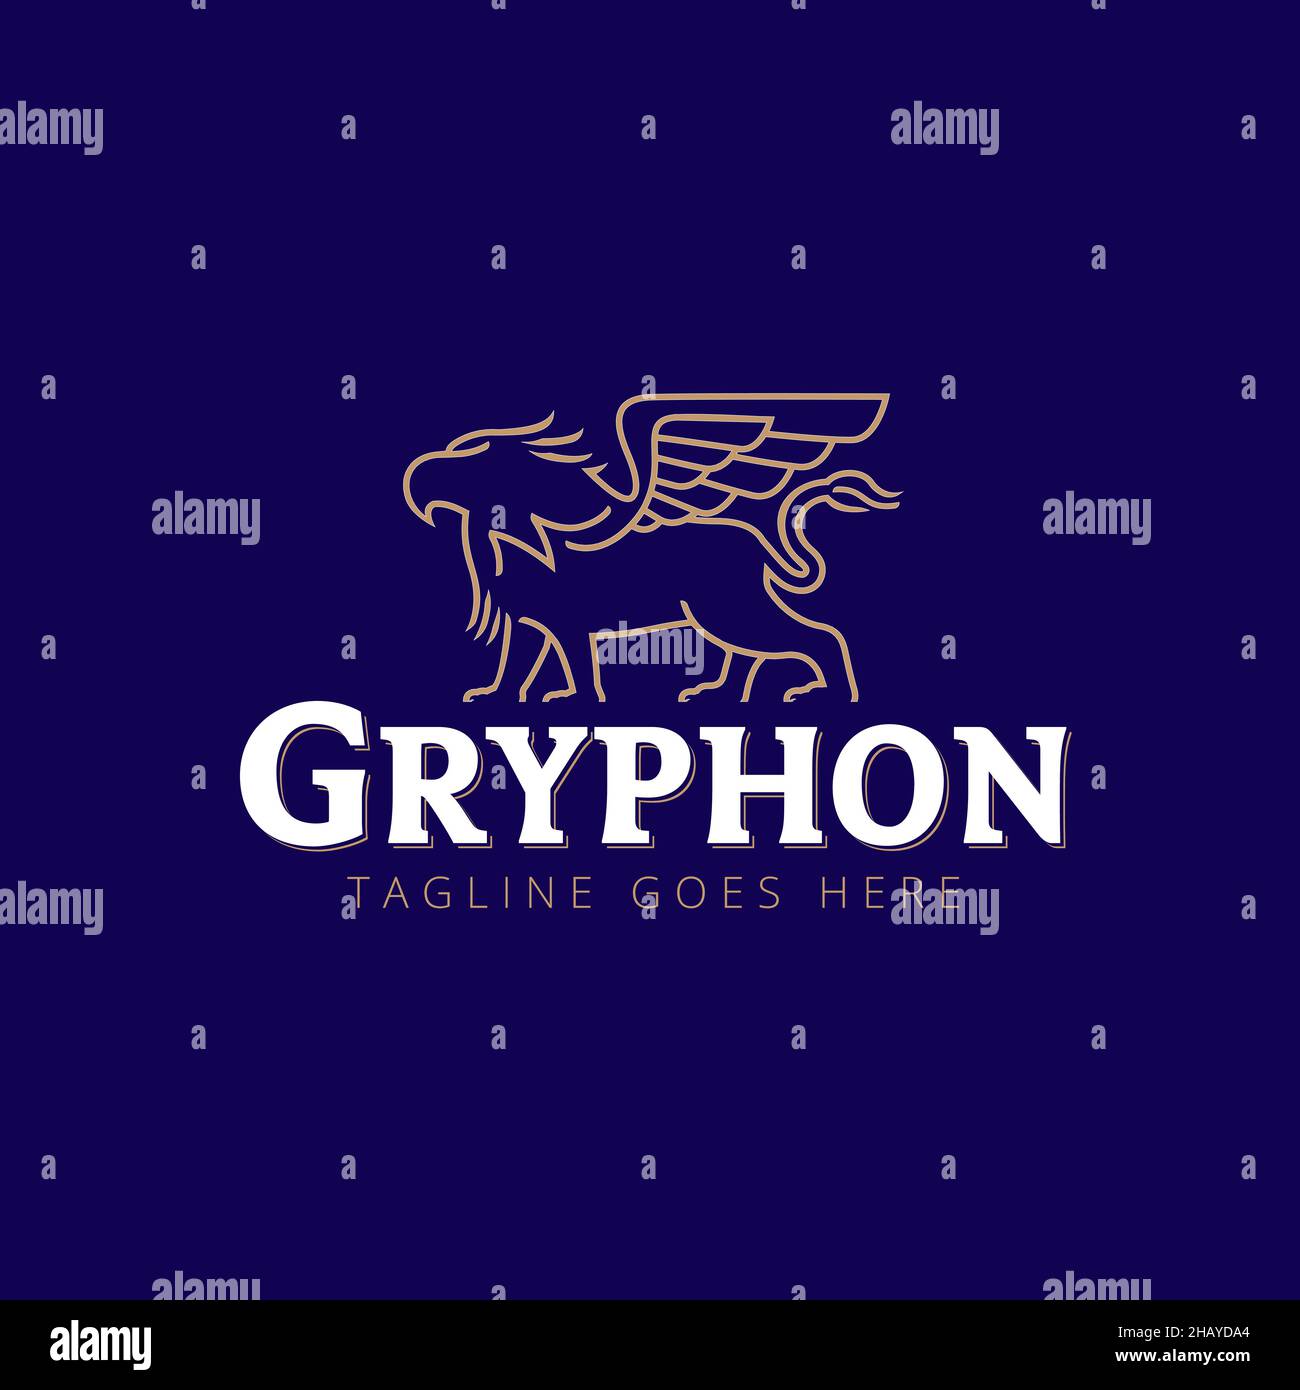 Gryphon vector illustration for commercial use line art style Stock Vector